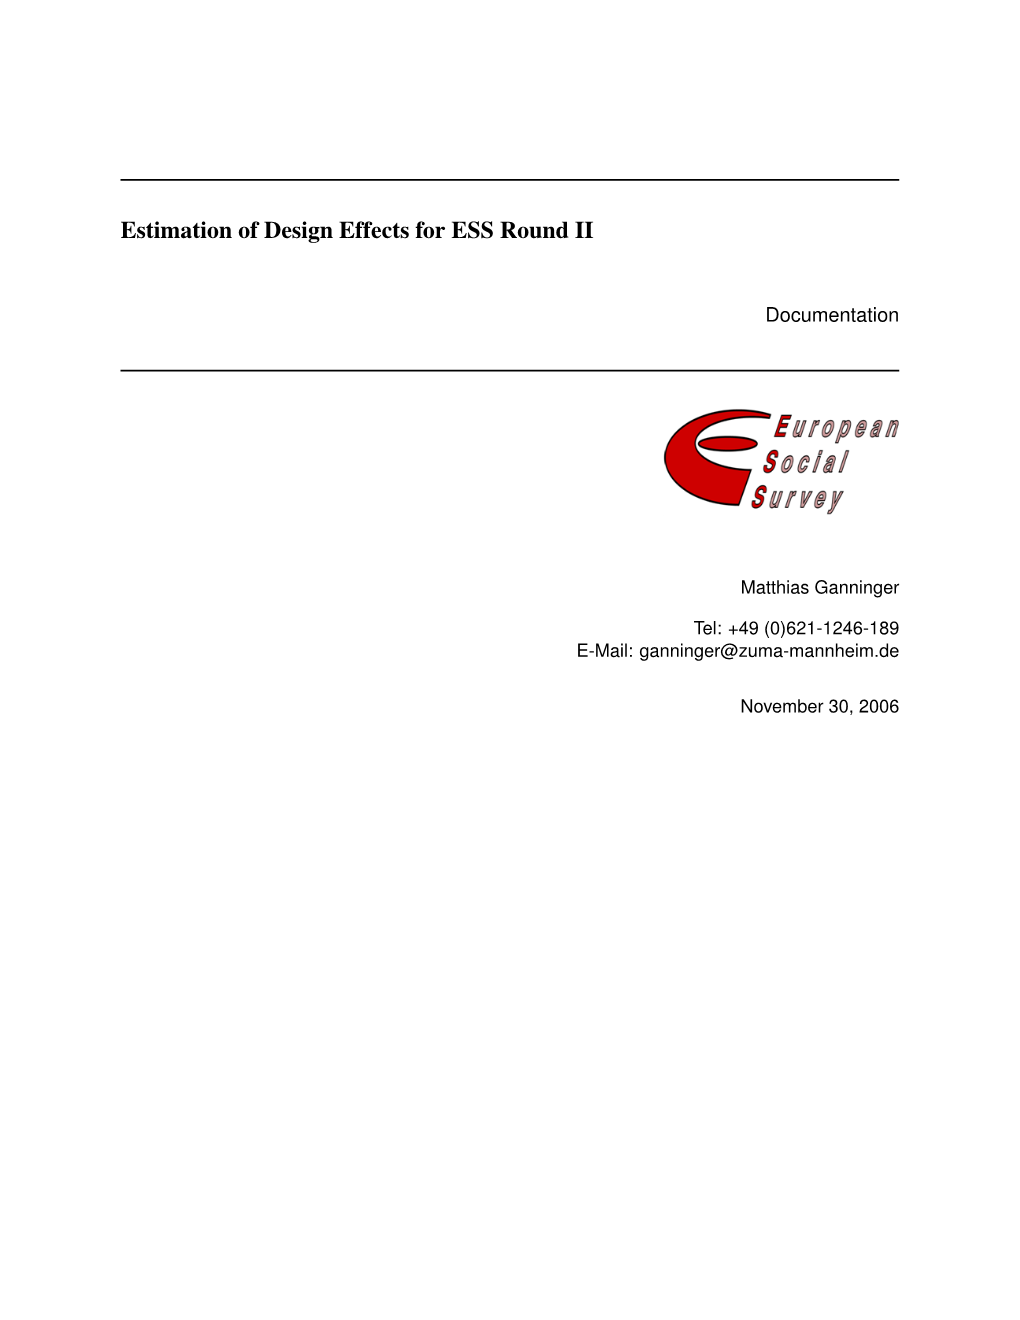 Estimation of Design Effects for ESS Round II